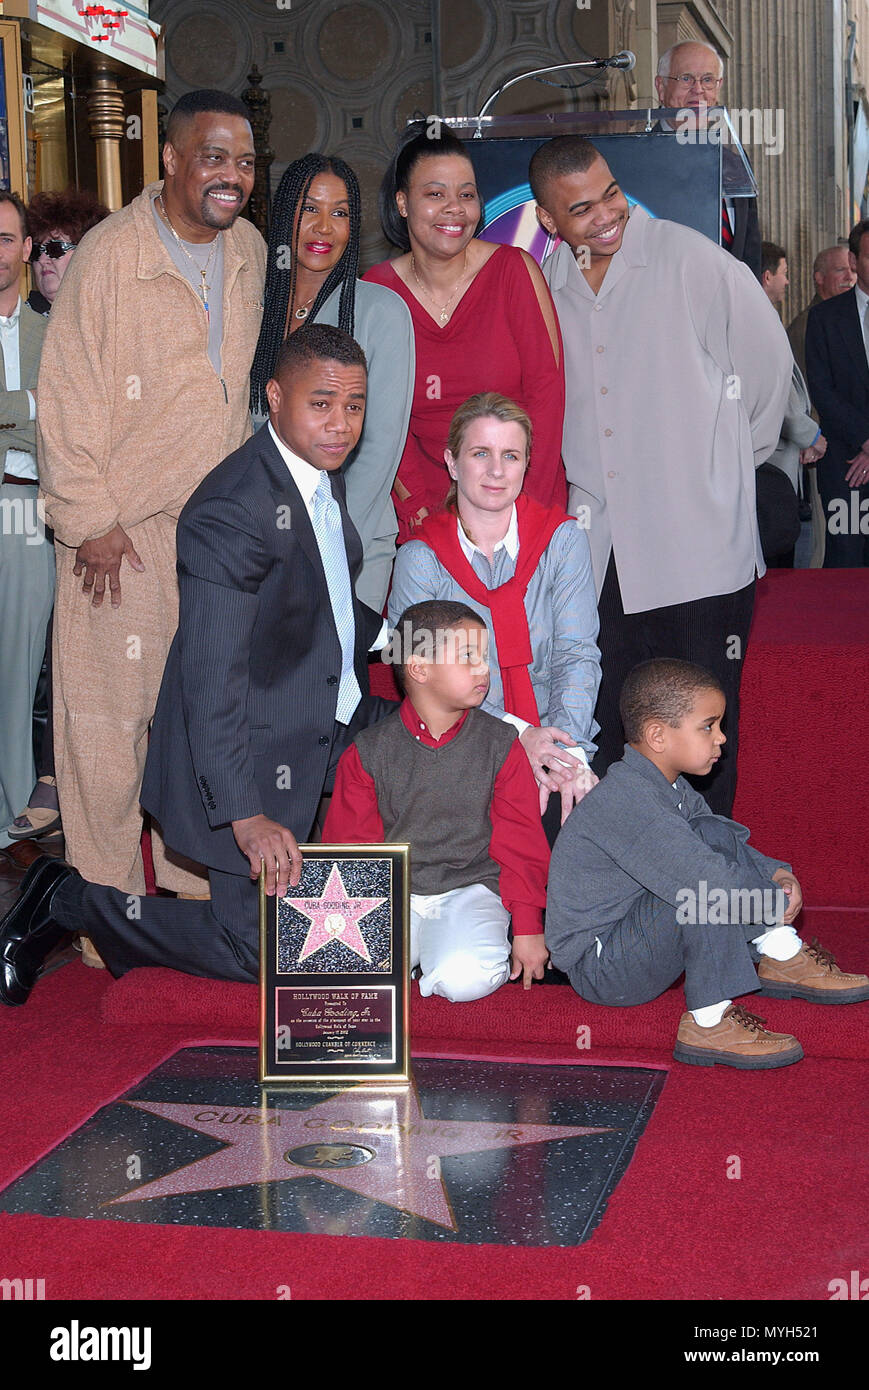 Cuba Gooding jr (posing with family, wife Sara, sons Spencer and Mason Dad Cuba and mom + brother Omar and sister) received a Star on the Hollywood Walk Of Fame in Los Angeles. January 17, 2002.           -            GoodingJrCuba family09.jpgGoodingJrCuba family09  Event in Hollywood Life - California, Red Carpet Event, USA, Film Industry, Celebrities, Photography, Bestof, Arts Culture and Entertainment, Topix Celebrities fashion, Best of, Hollywood Life, Event in Hollywood Life - California, movie celebrities, TV celebrities, Music celebrities, Topix, Bestof, Arts Culture and Entertainment, Stock Photo